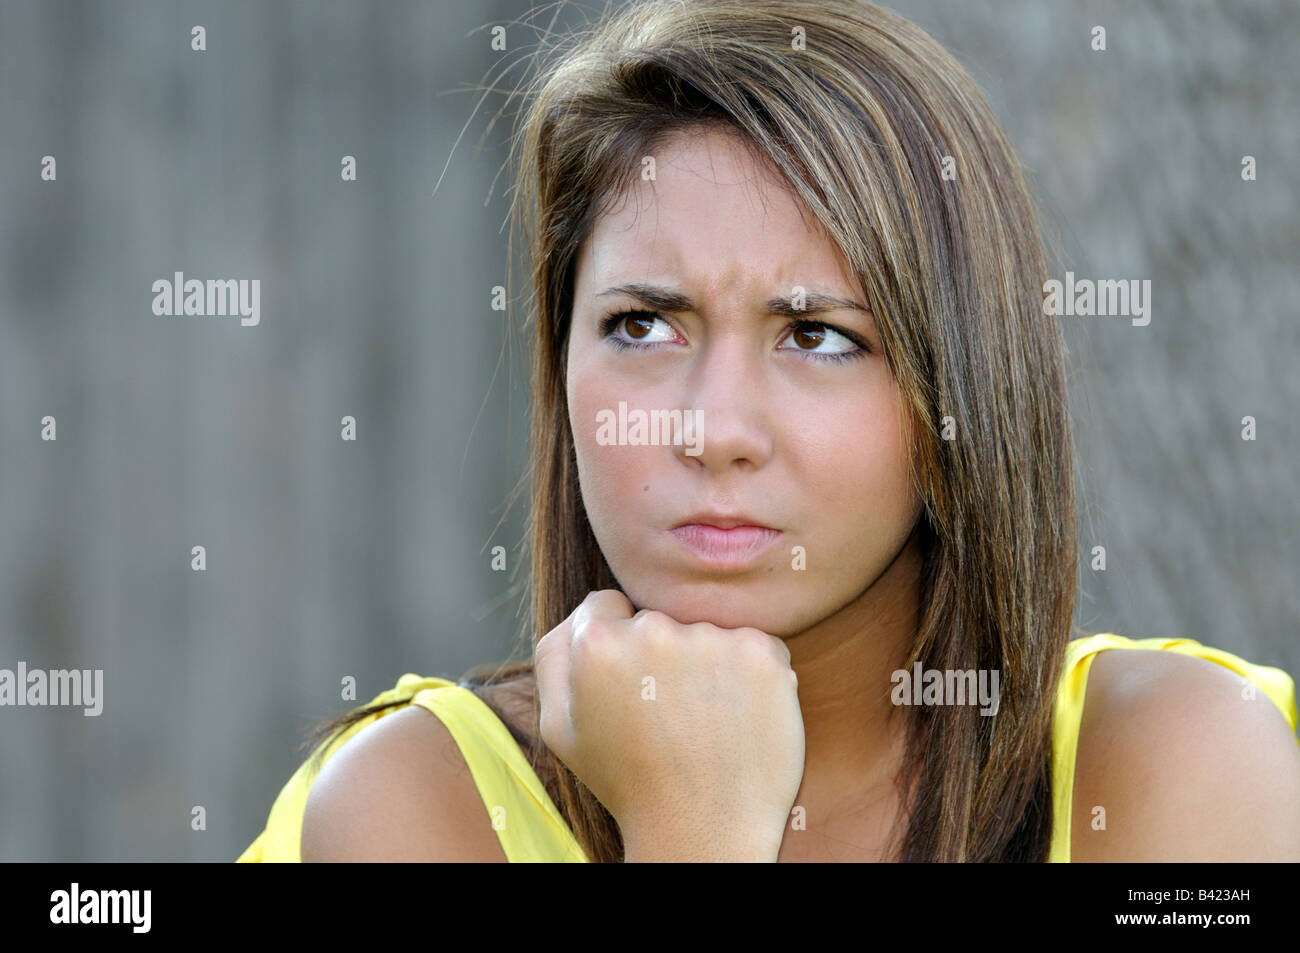 A 16 year old pretty caucasian girl, brown hair and eyes has an angry expression on her face. Conceptual image. Stock Photo